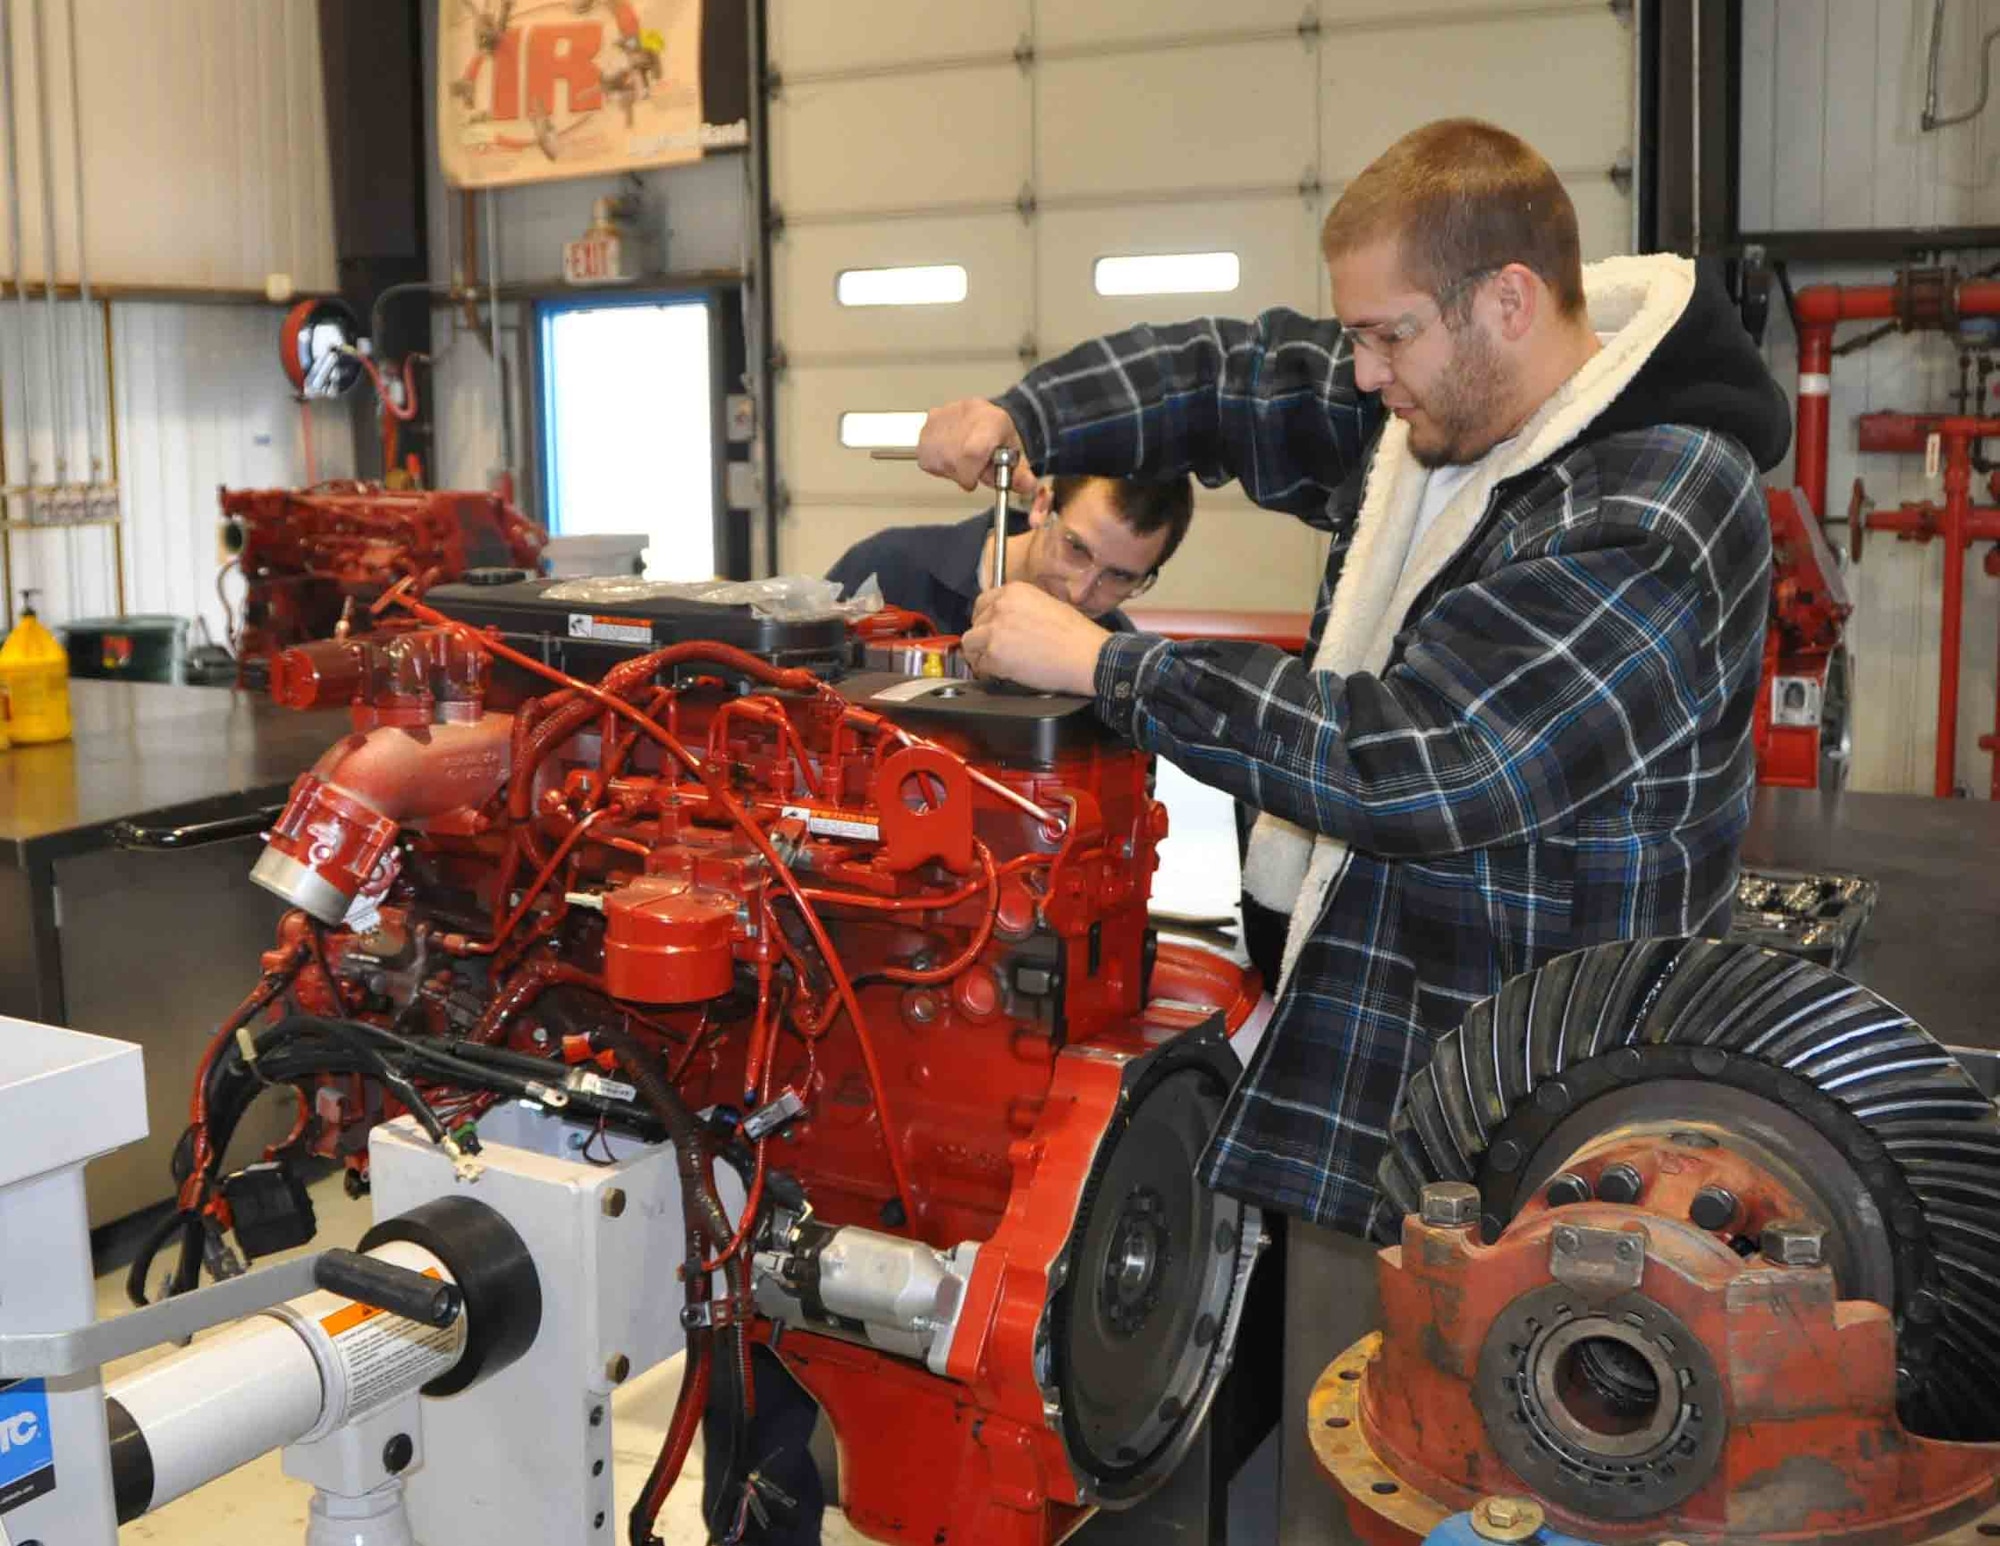 Both students are enrolled in American River College's clean diesel technology program at the former Mather Air Force Base in Sacramento, Calif. (Photo by Wojciech Betlej)